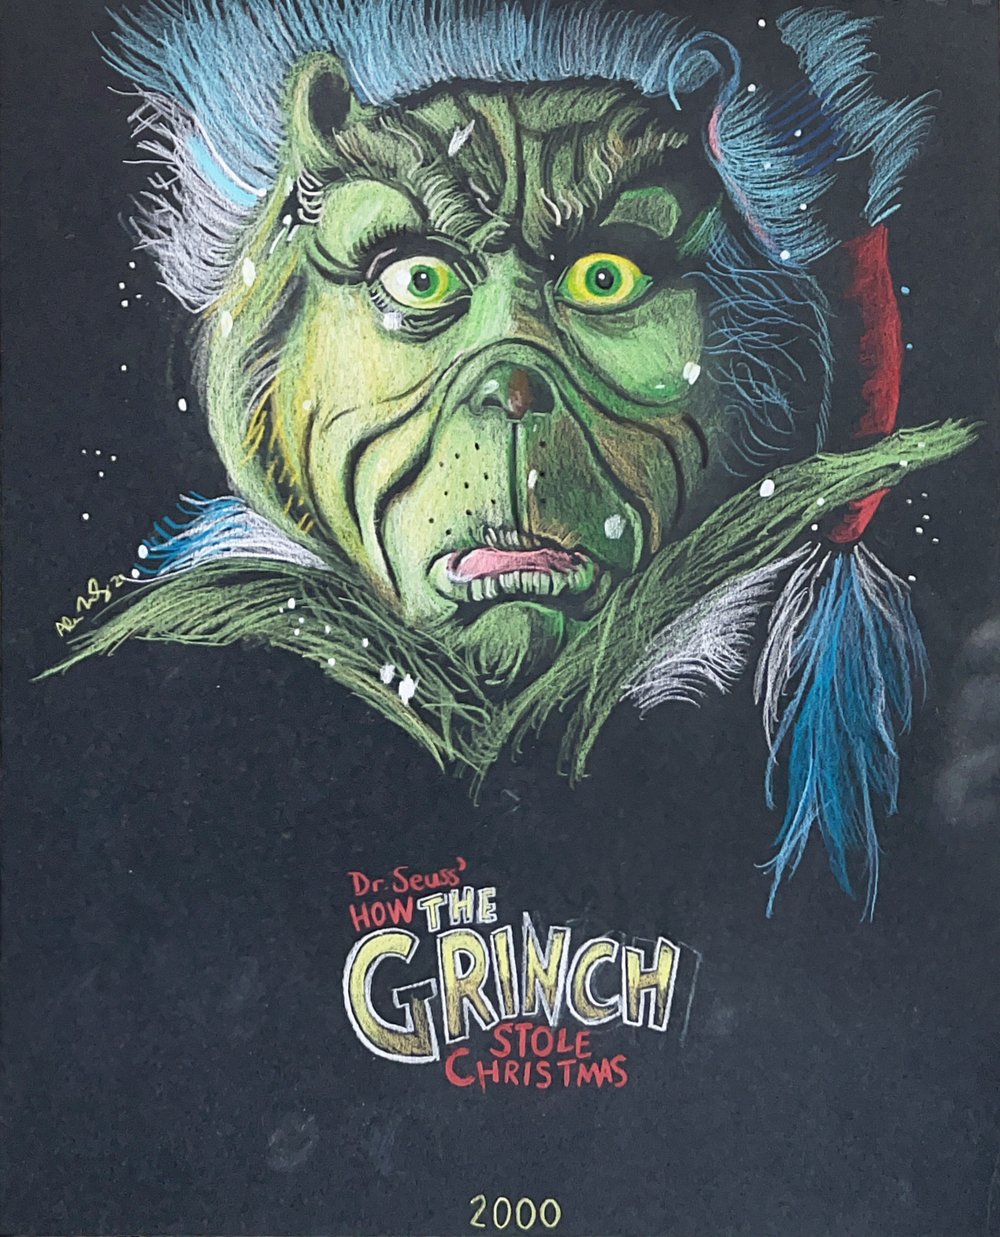 Image of “HELP ME… I’m FEELING” DR. SEUSS’ HOW THE GRINCH STOLE CHRISTMAS Art Print